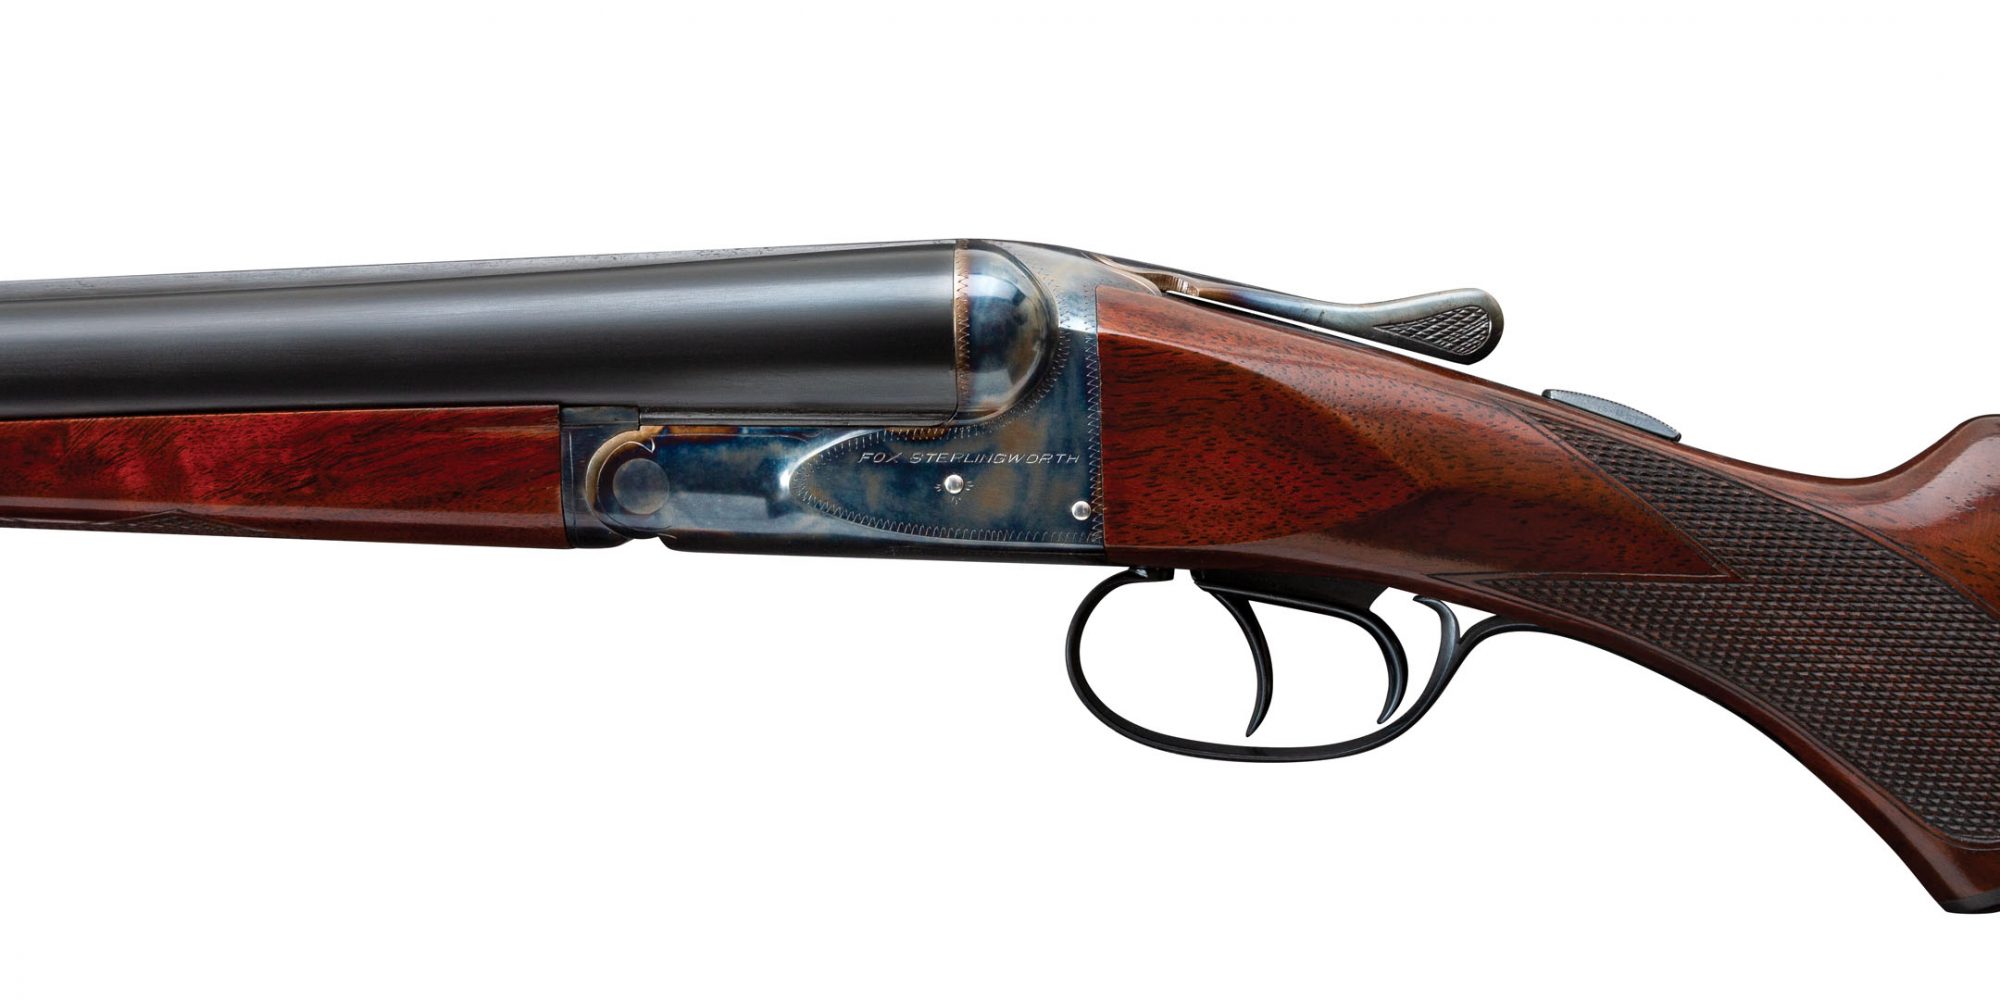 Fox Sterlingworth 12 Gauge Shotgun from 1932, after restoration work performed by Turnbull Restoration Co. of Bloomfield, NY